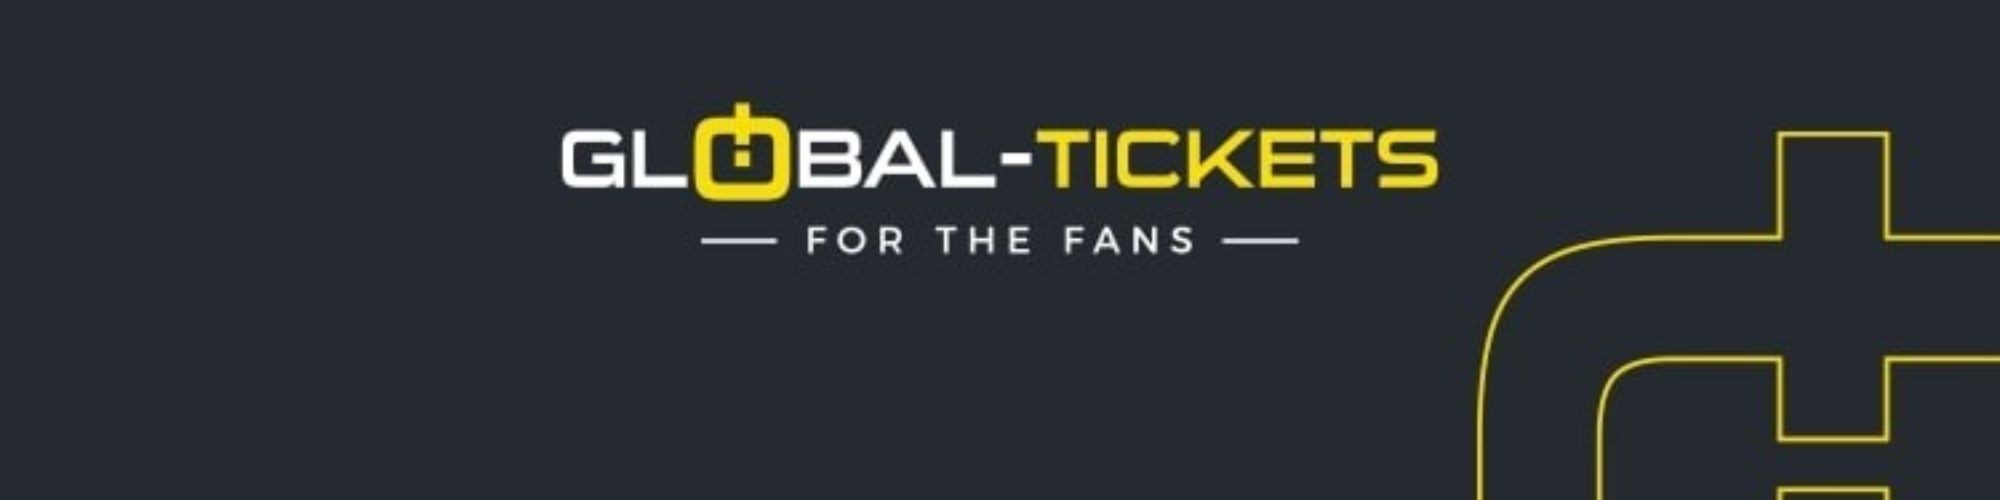 TD Entertainment C.V./Global-Tickets cover image